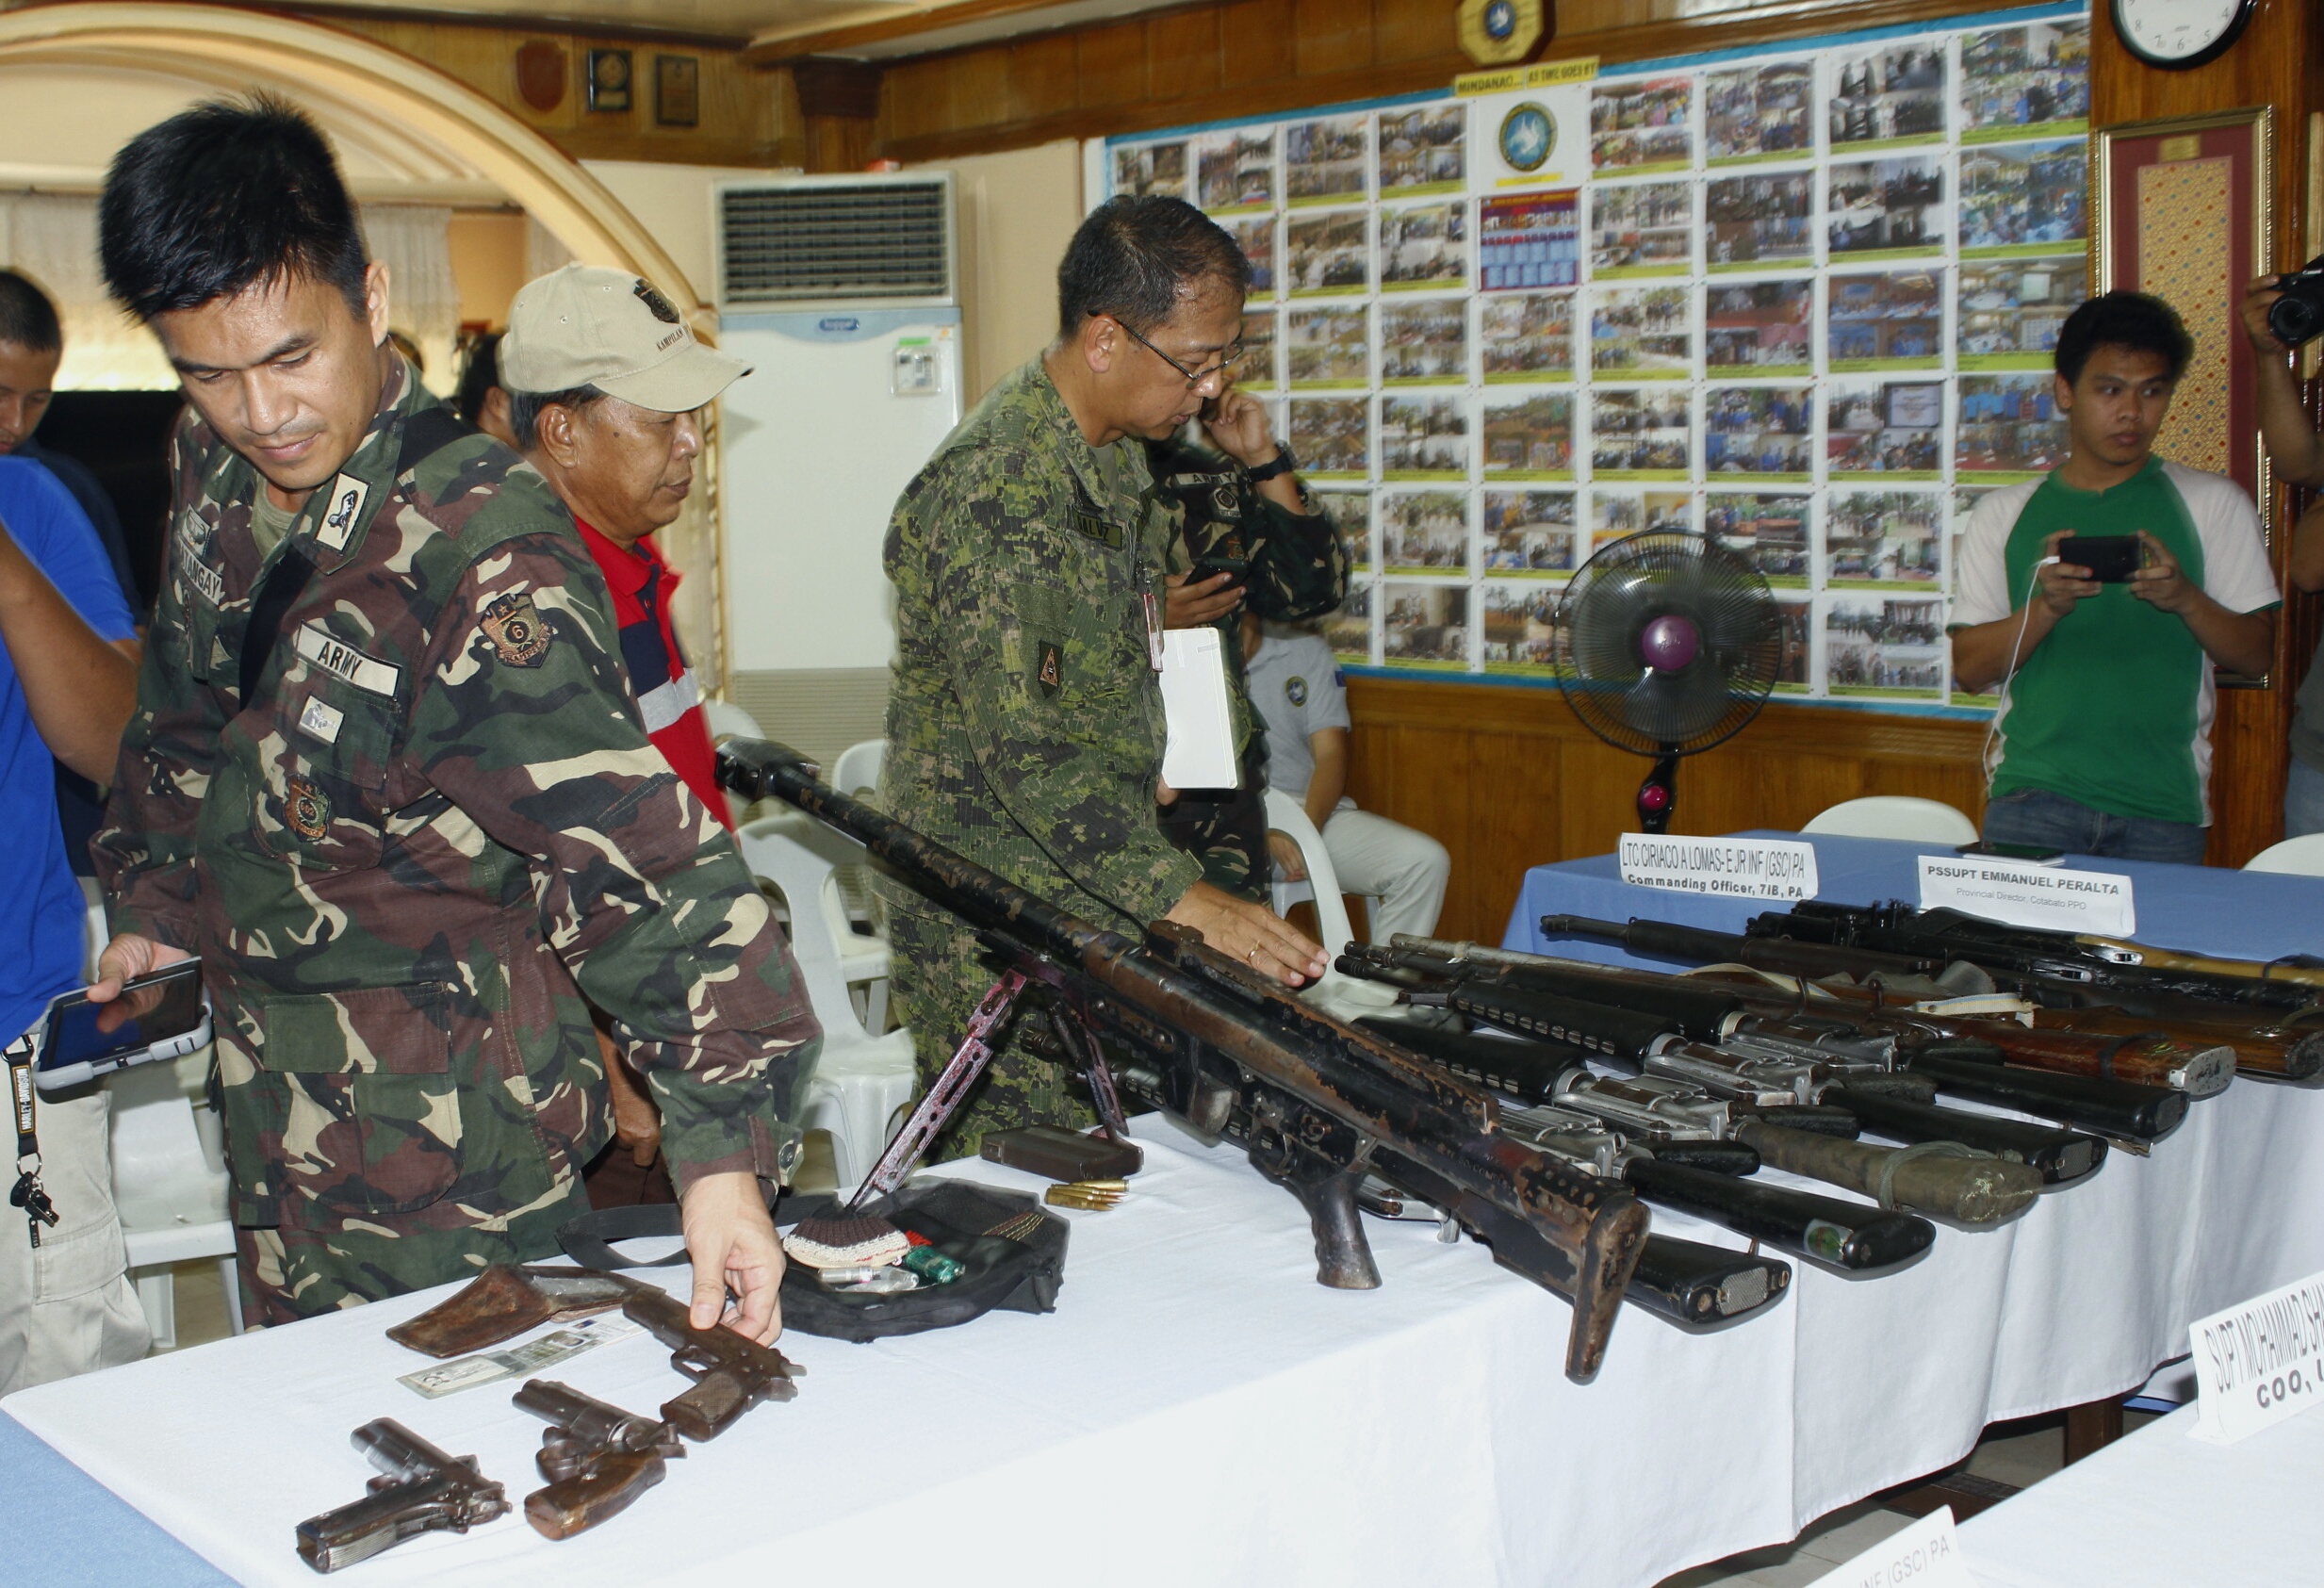 JOINT OPERATION. Authorities present firearms recovered during a joint anti-drug operation by the government and the MILF. All photos from the Office of the Presidential Adviser on the Peace Process  